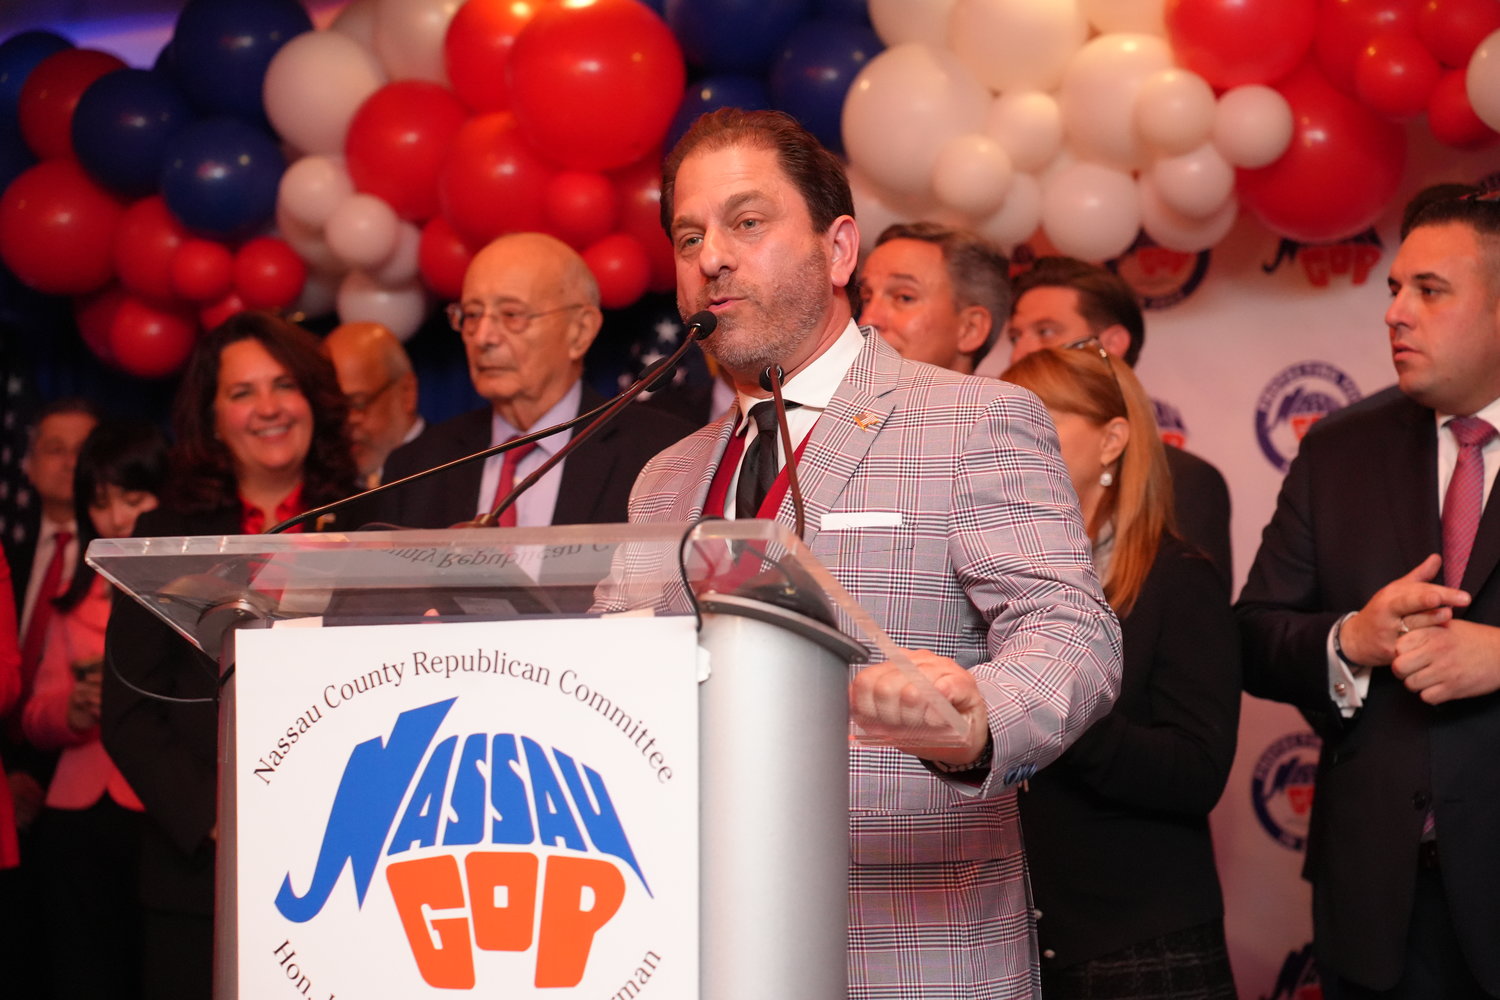 Republican Ari Brown defeated Long Beach Democrat Mike Delury in a race for the State Assembly.